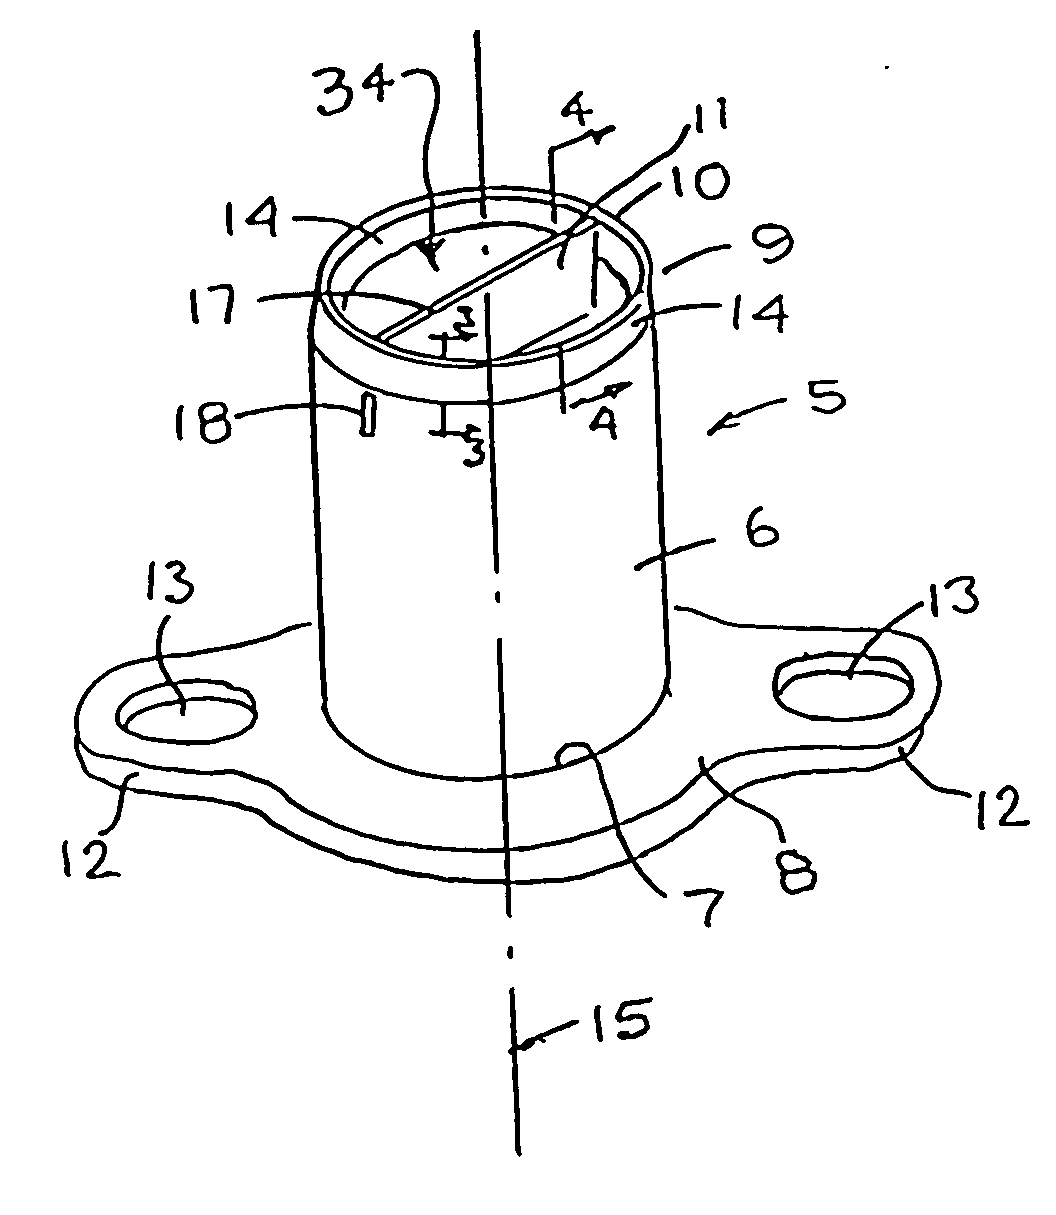 Fruit coring device for producing a closed bore